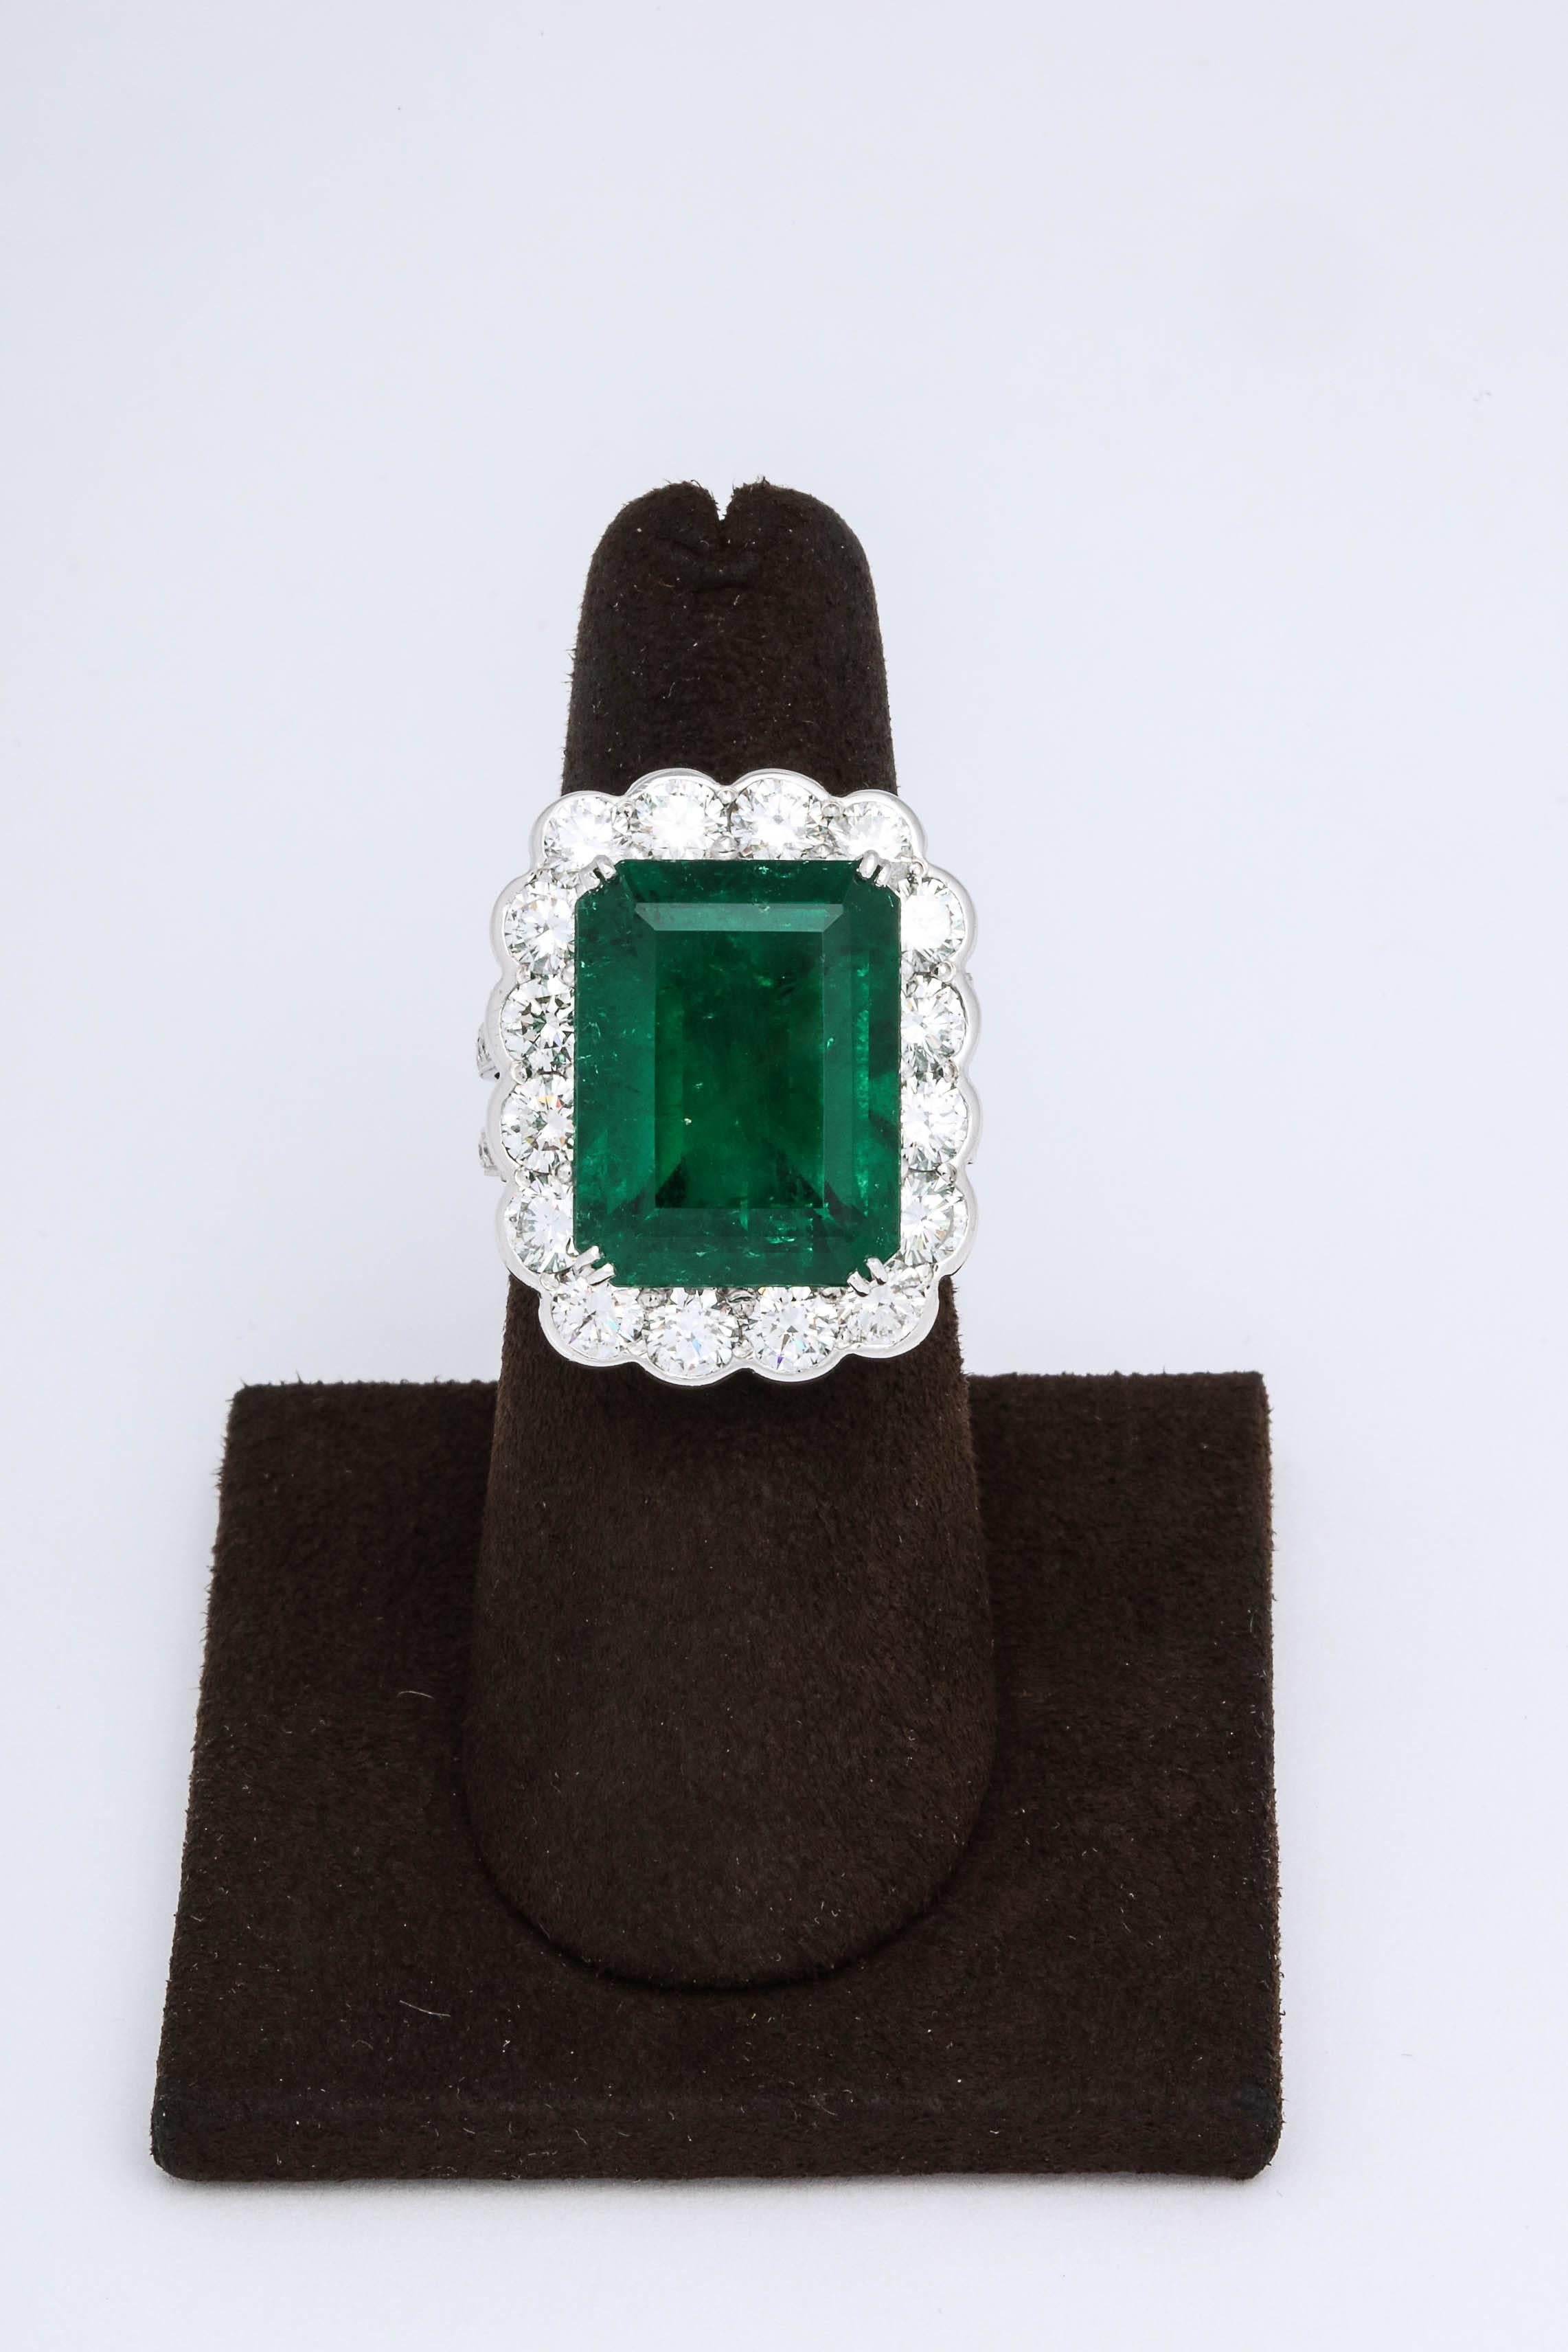 
 A FABULOUS Green Emerald Ring

13.05 carat GIA certified Emerald cut Green Emerald -- beautiful GEM color and luster.

5.03 carats of white round brilliant cut diamonds.

The emerald is from Colombia, GIA states minor clarity enhancement F1

A